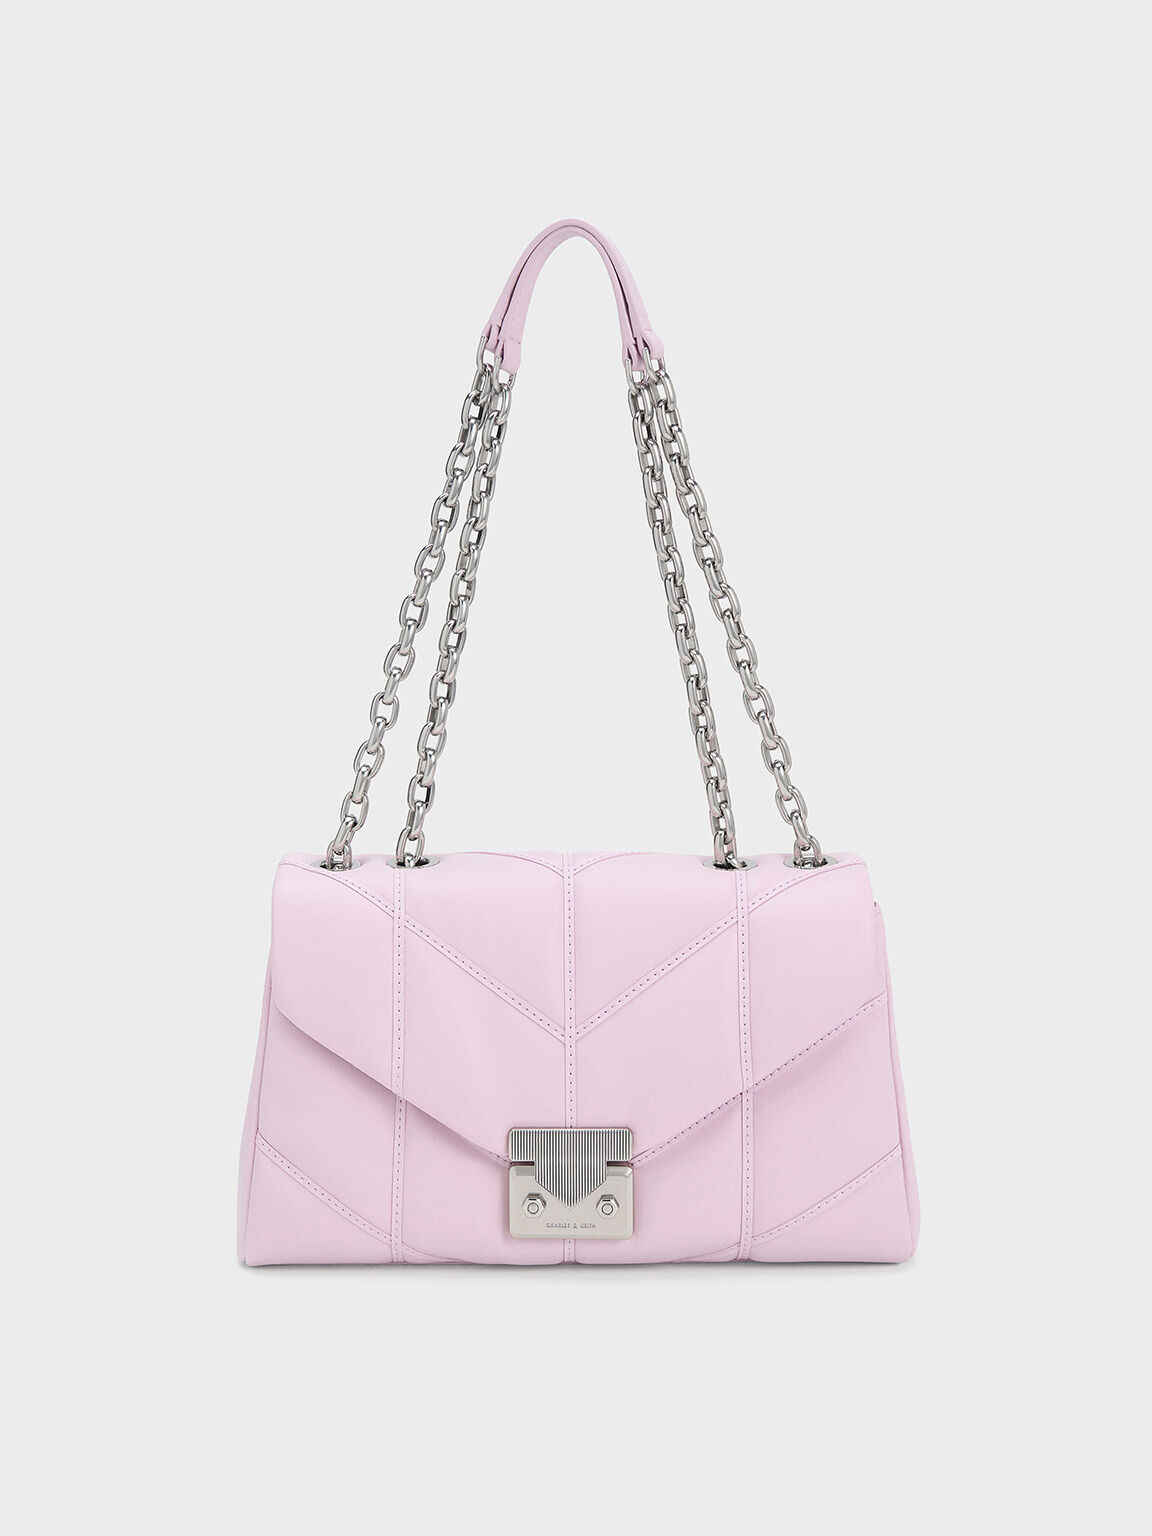 Women's Shoulder Bags | Exclusive Styles | CHARLES & KEITH SG